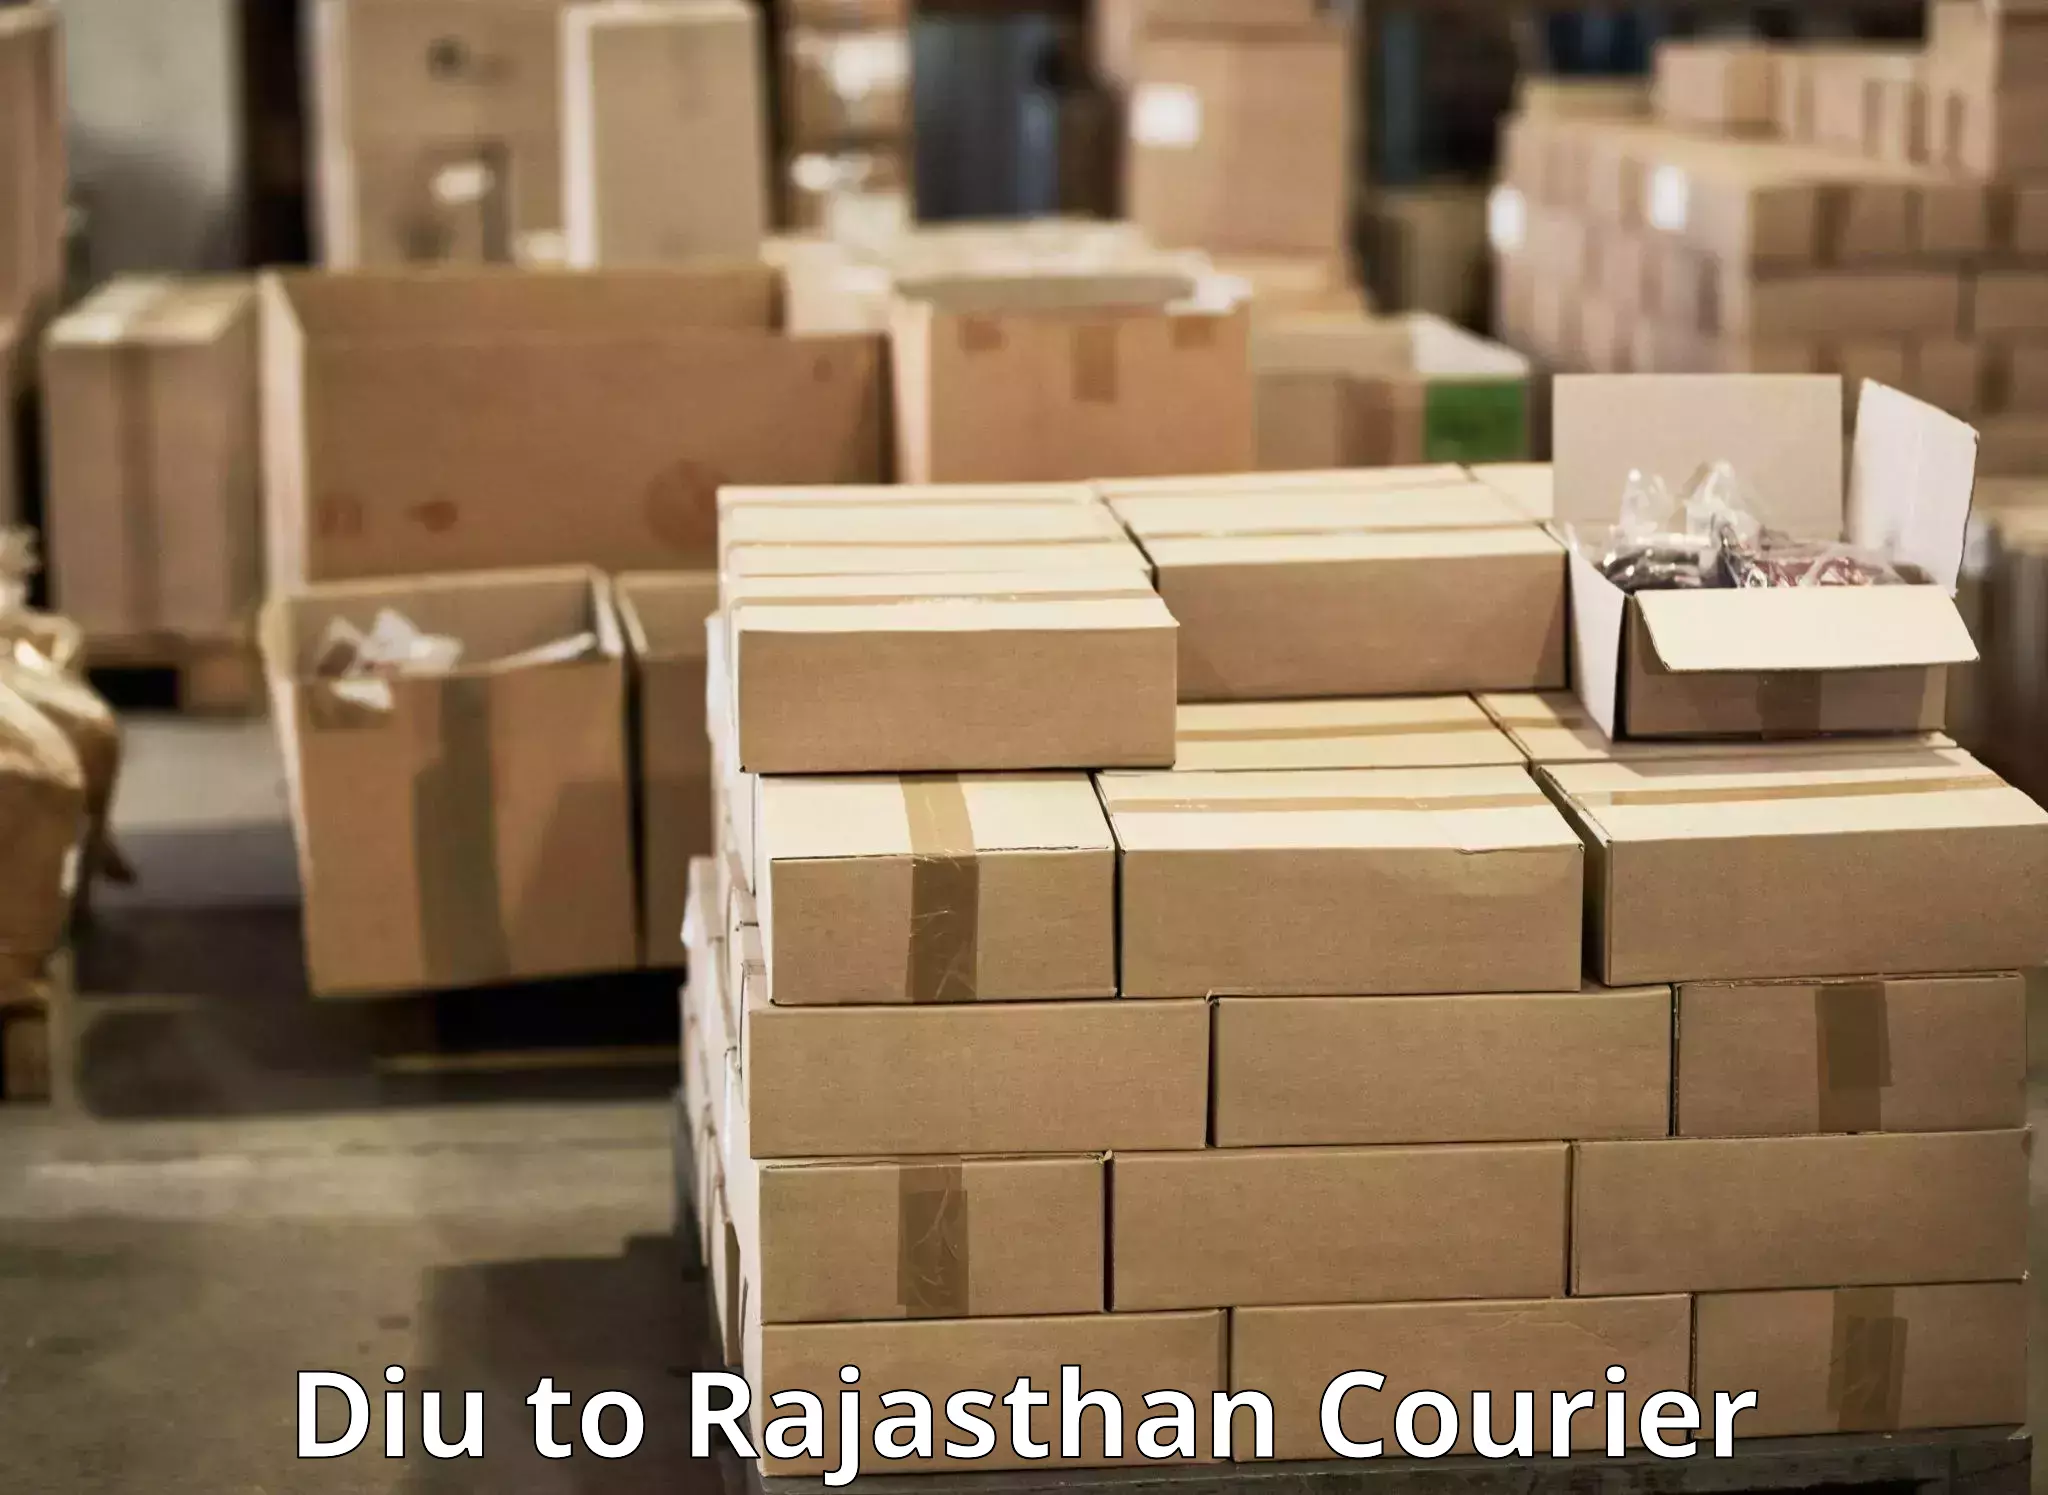 International courier networks Diu to Udaipur